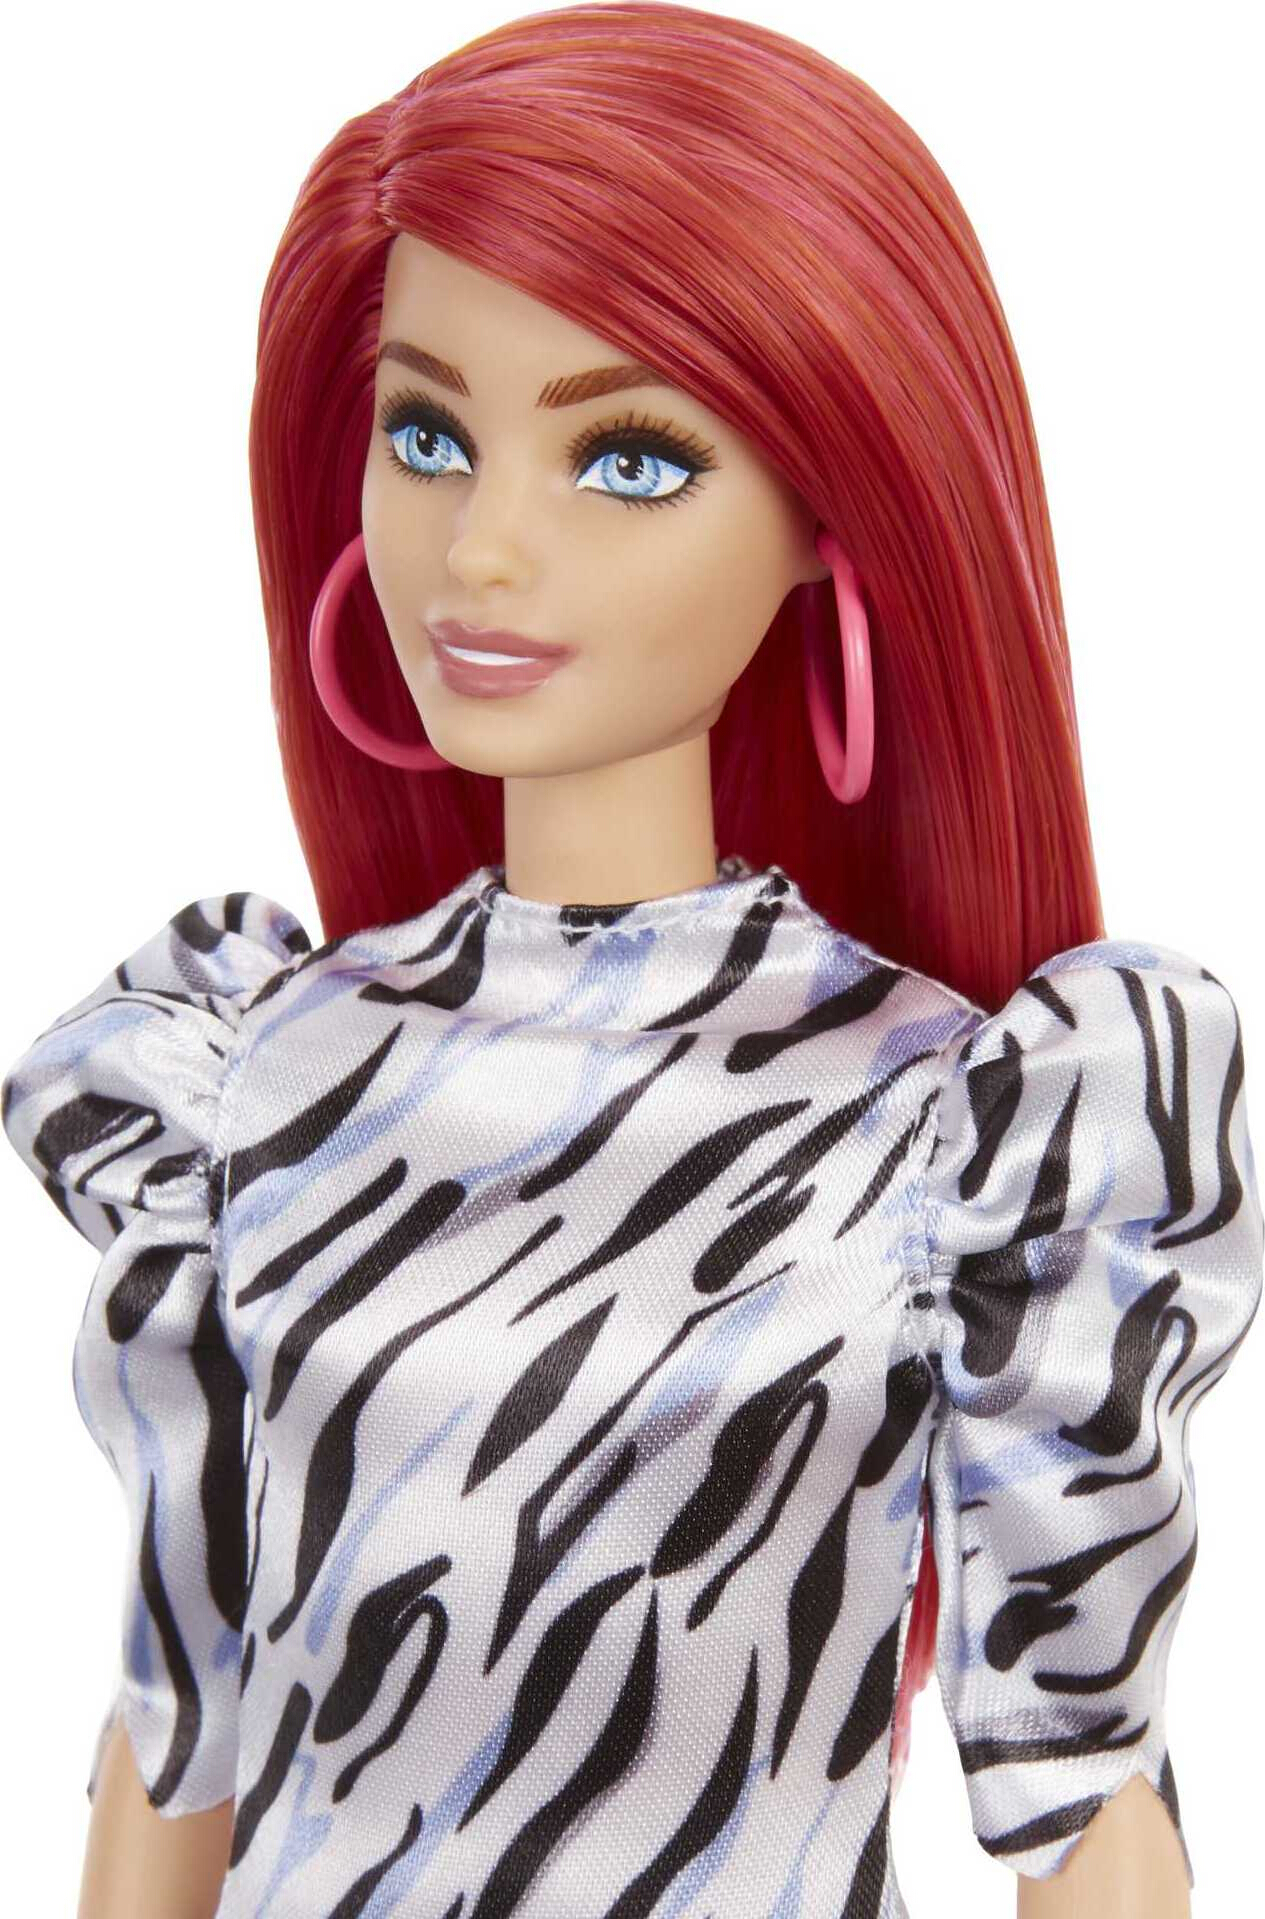 Barbie Fashionistas Doll #168 with Smaller Bust, & Long Red Hair in Zebra-striped Dress - image 4 of 7